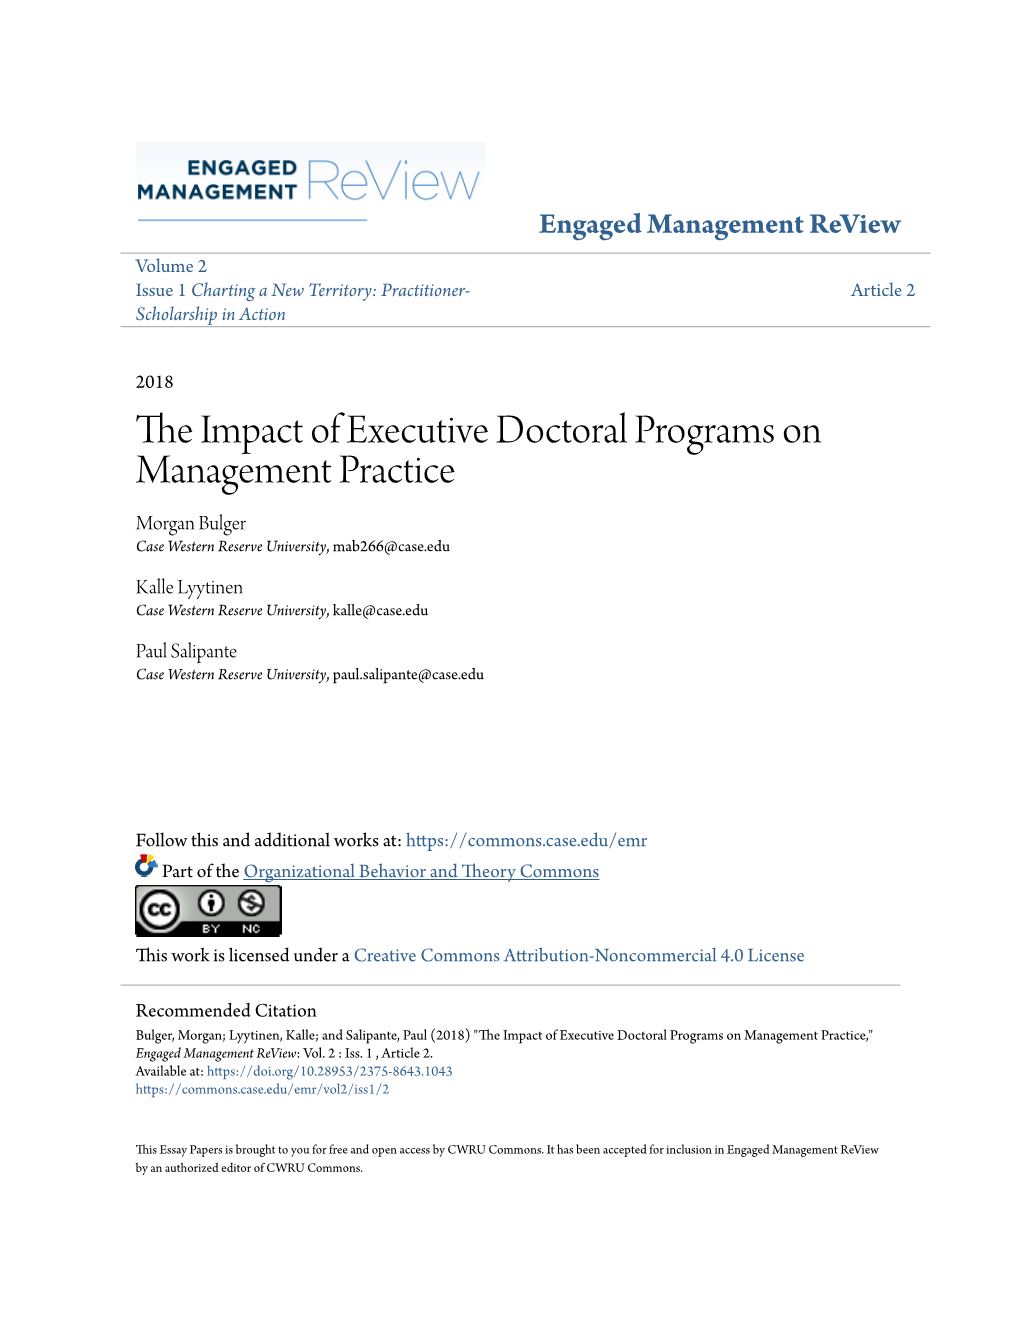 The Impact of Executive Doctoral Programs on Management Practice